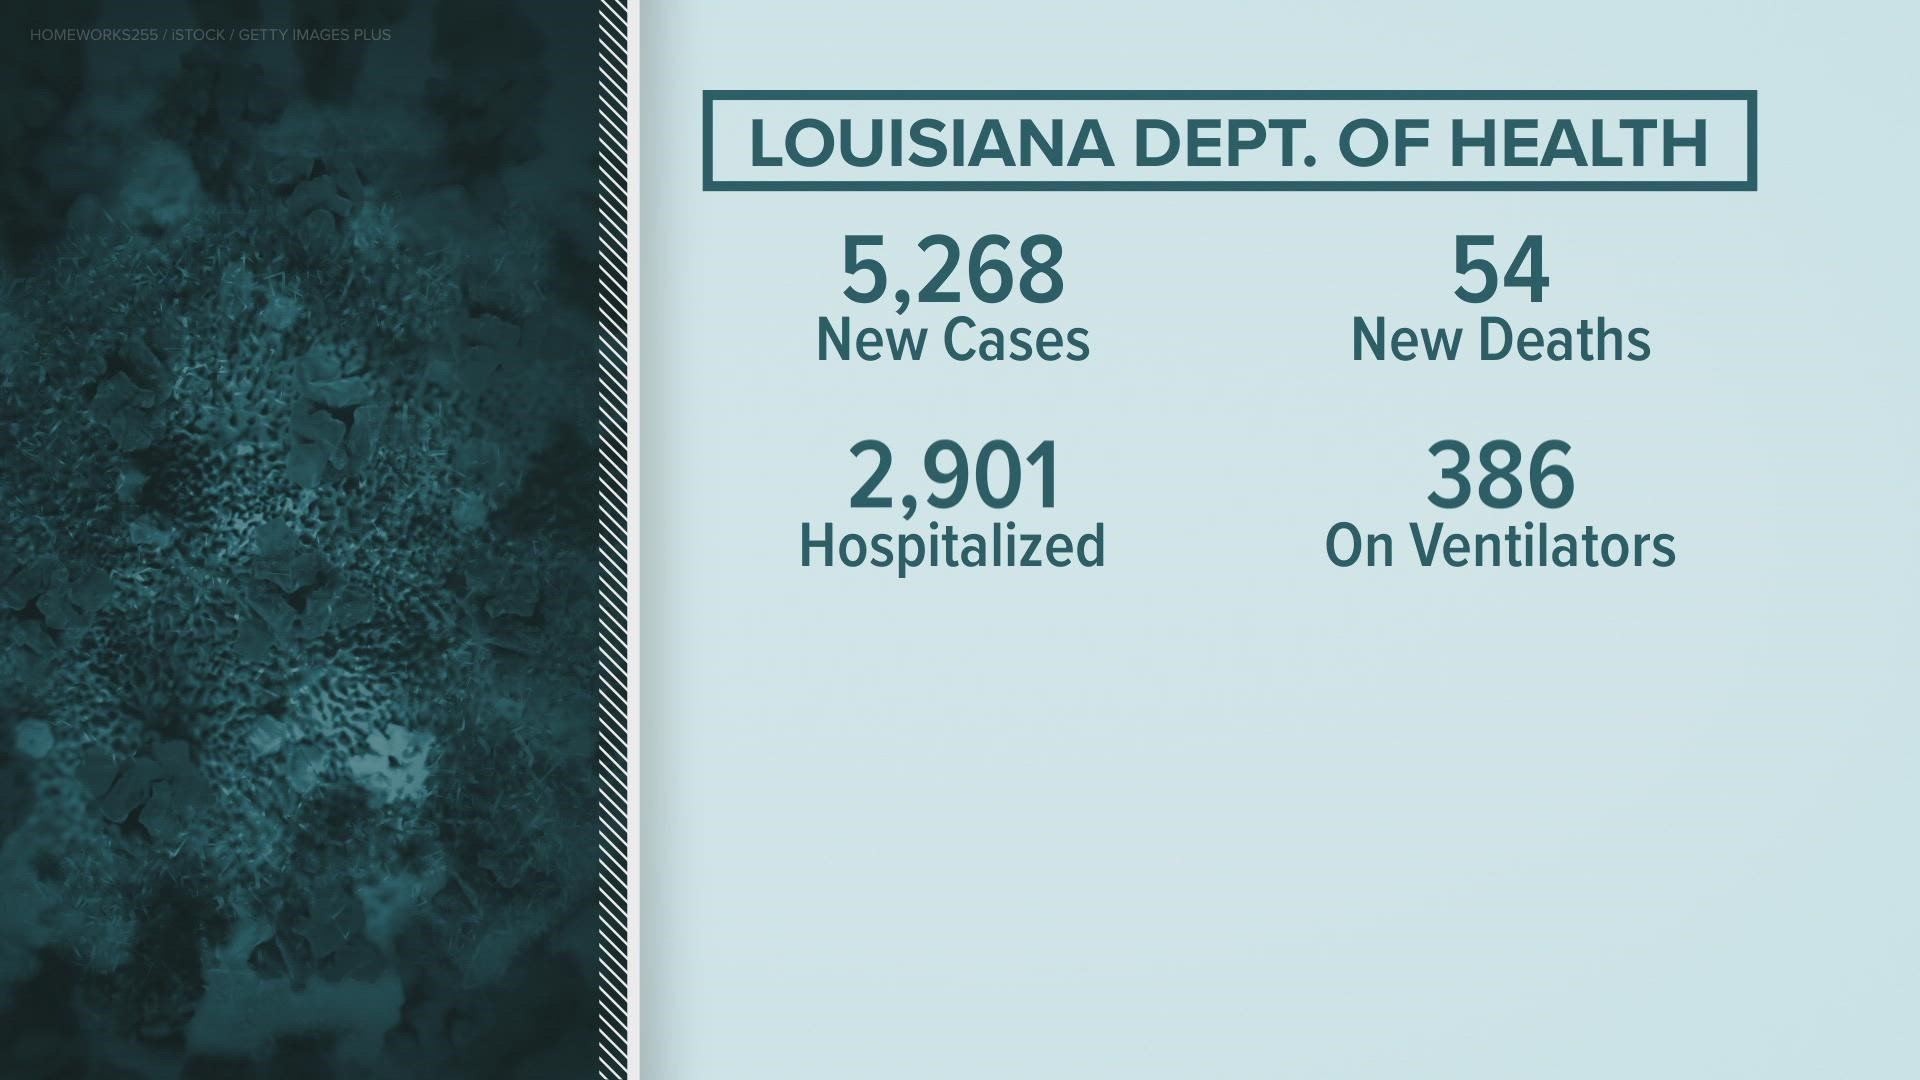 The LDH announced an increase of 6 covid-19 patients in Louisiana hospitals, bringing the total to 2,901.